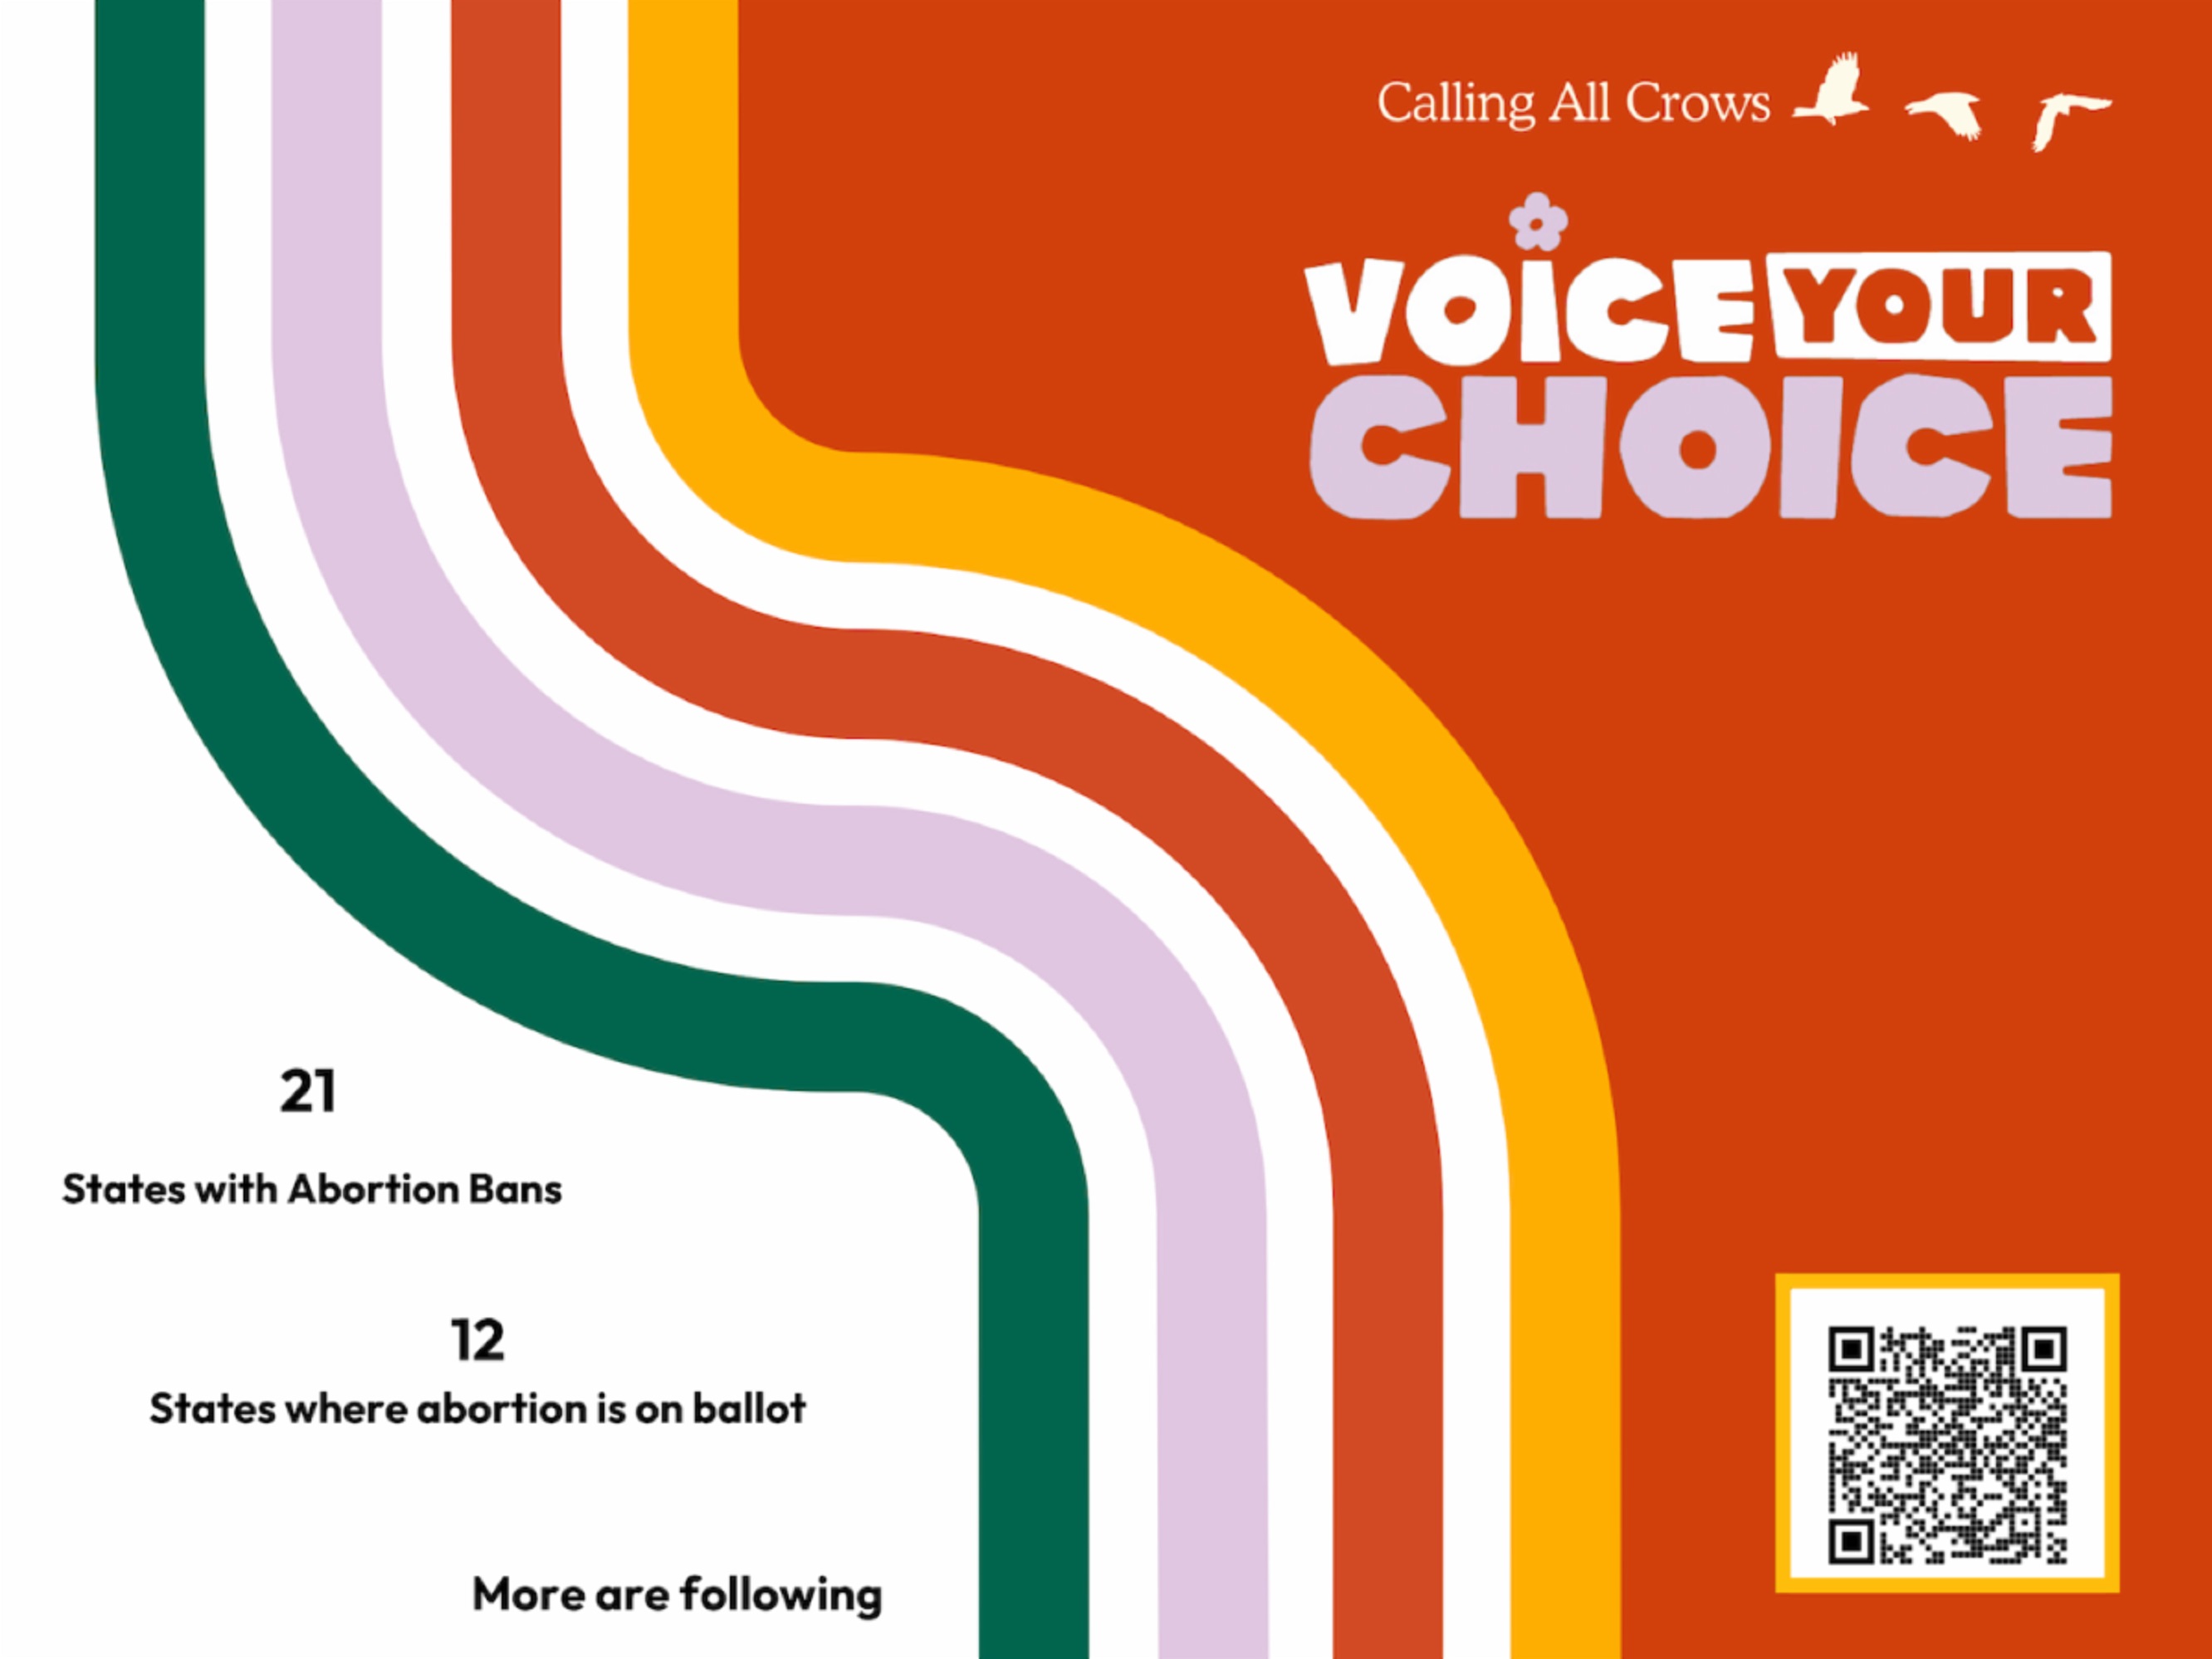 Calling All Crows launches Voice Your Choice campaign to protect reproductive freedom + partnering with BallotReady